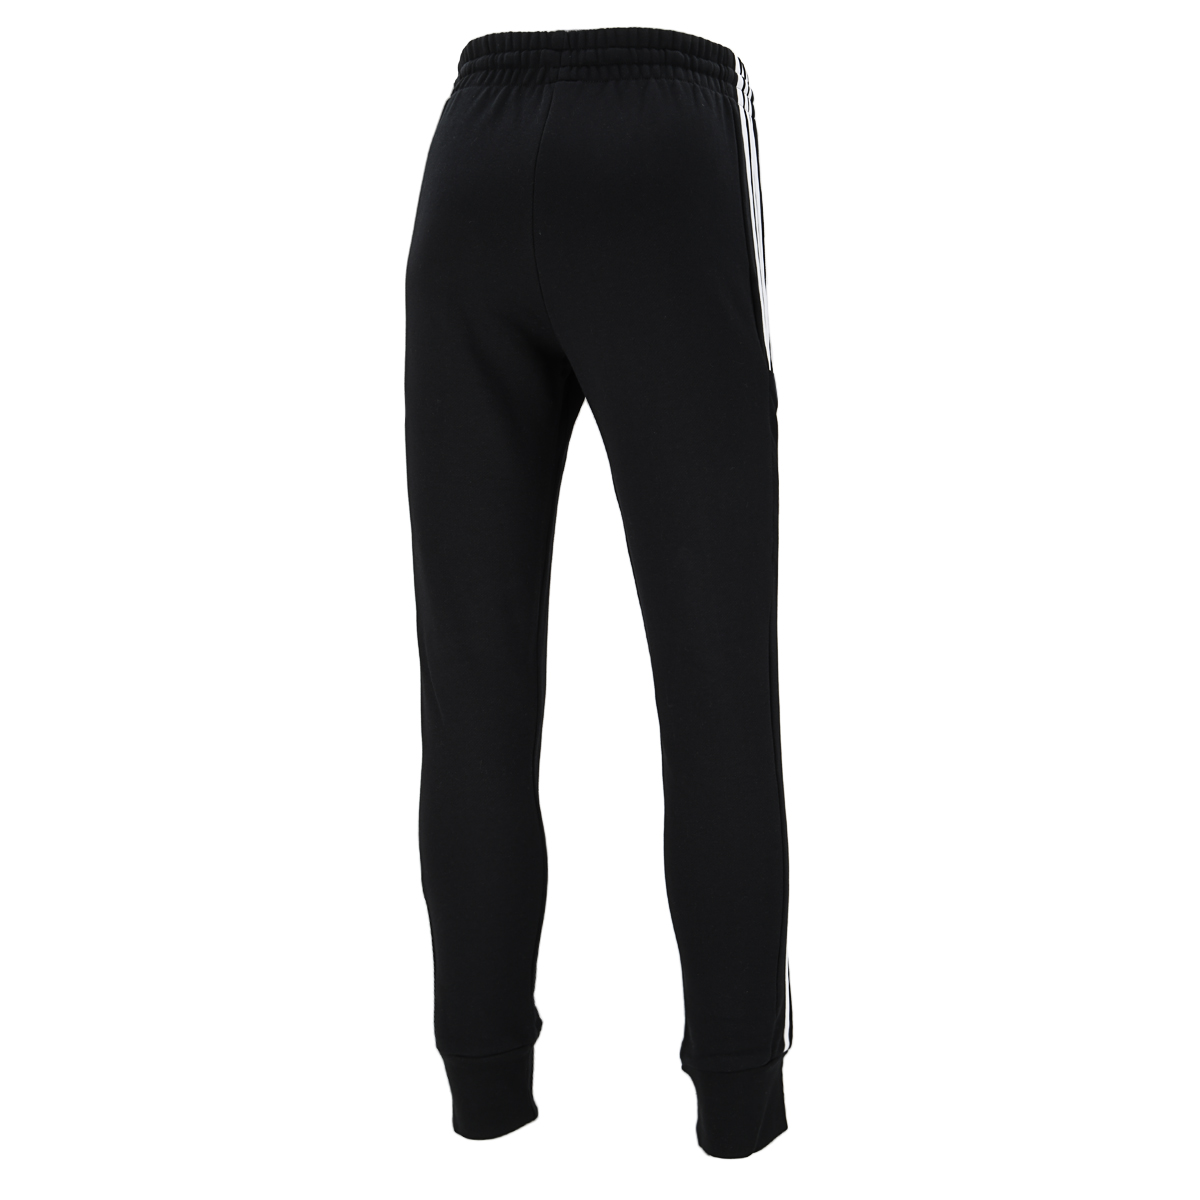 Pantalon Urbano adidas Essentials French Terry 3 Stripes Hombre,  image number null